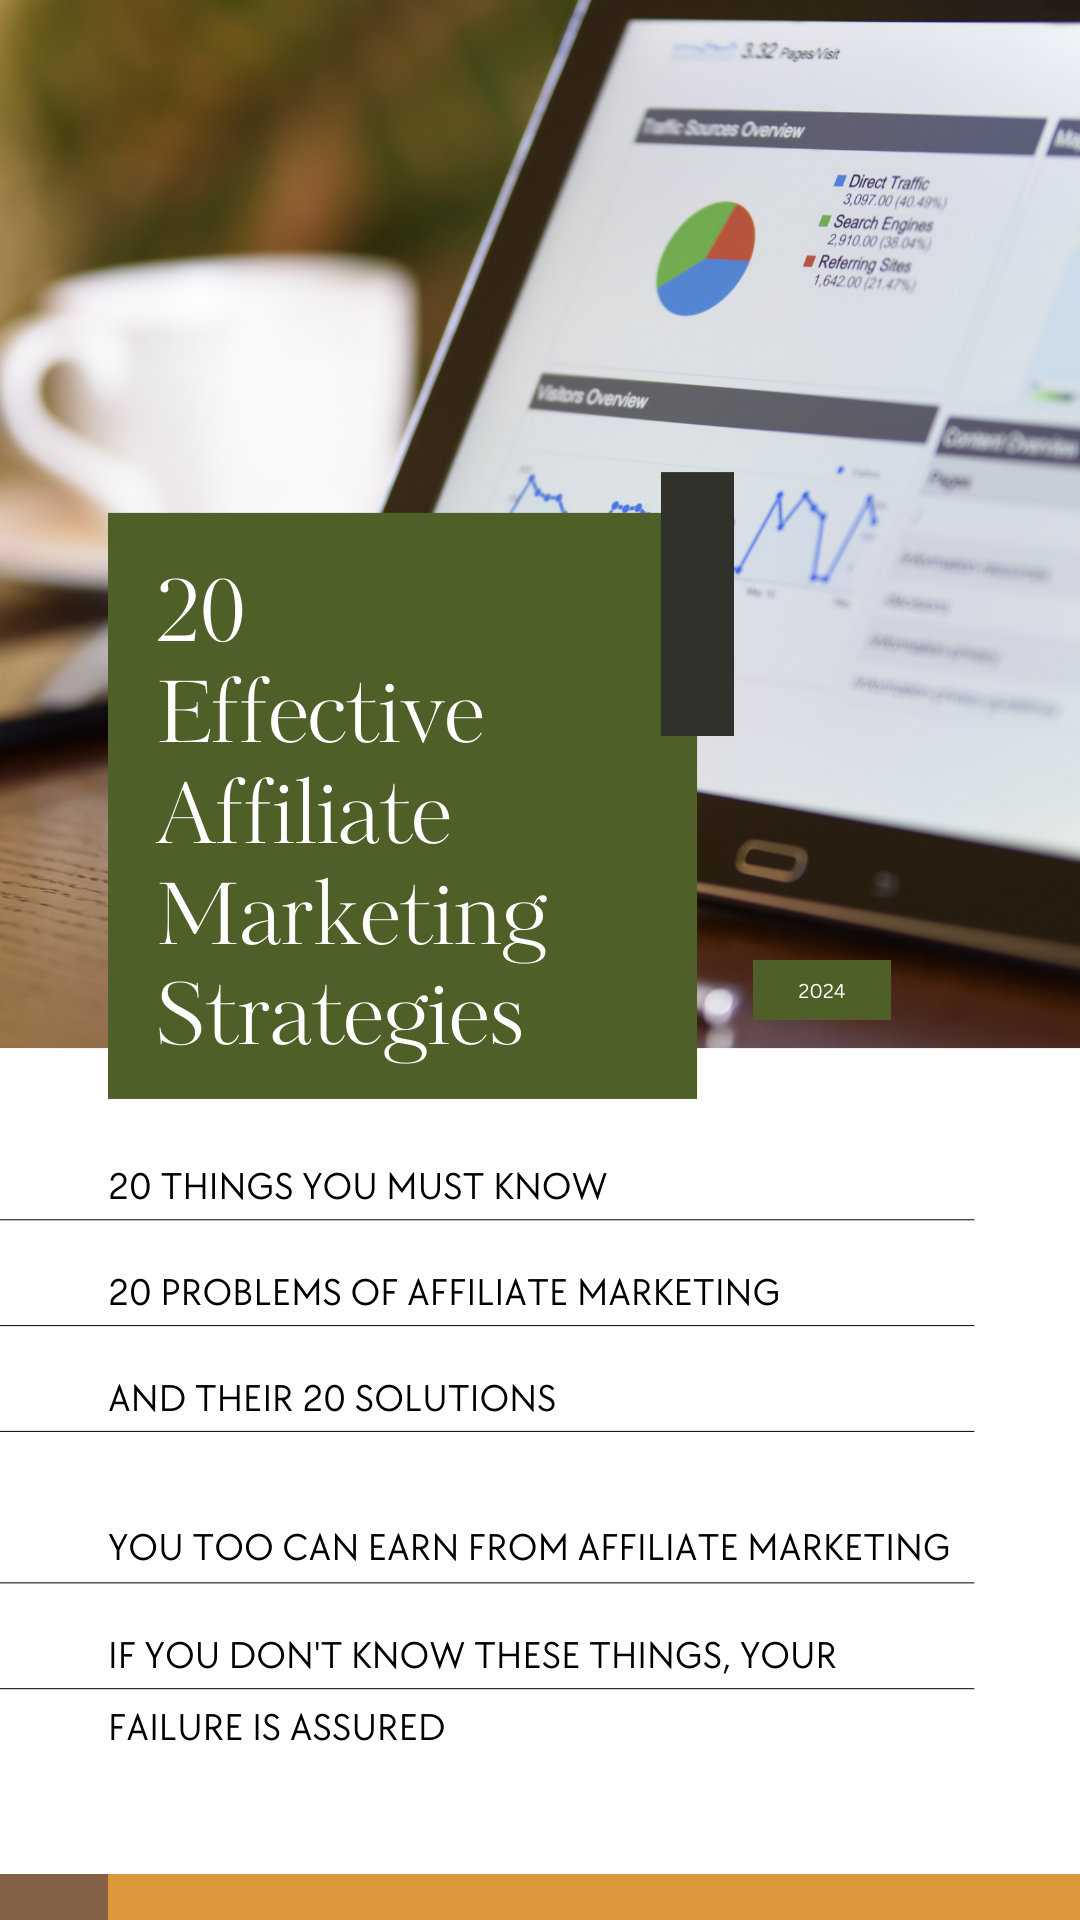 Top 20 ways to become a millionaire as an affiliate marketer  Image